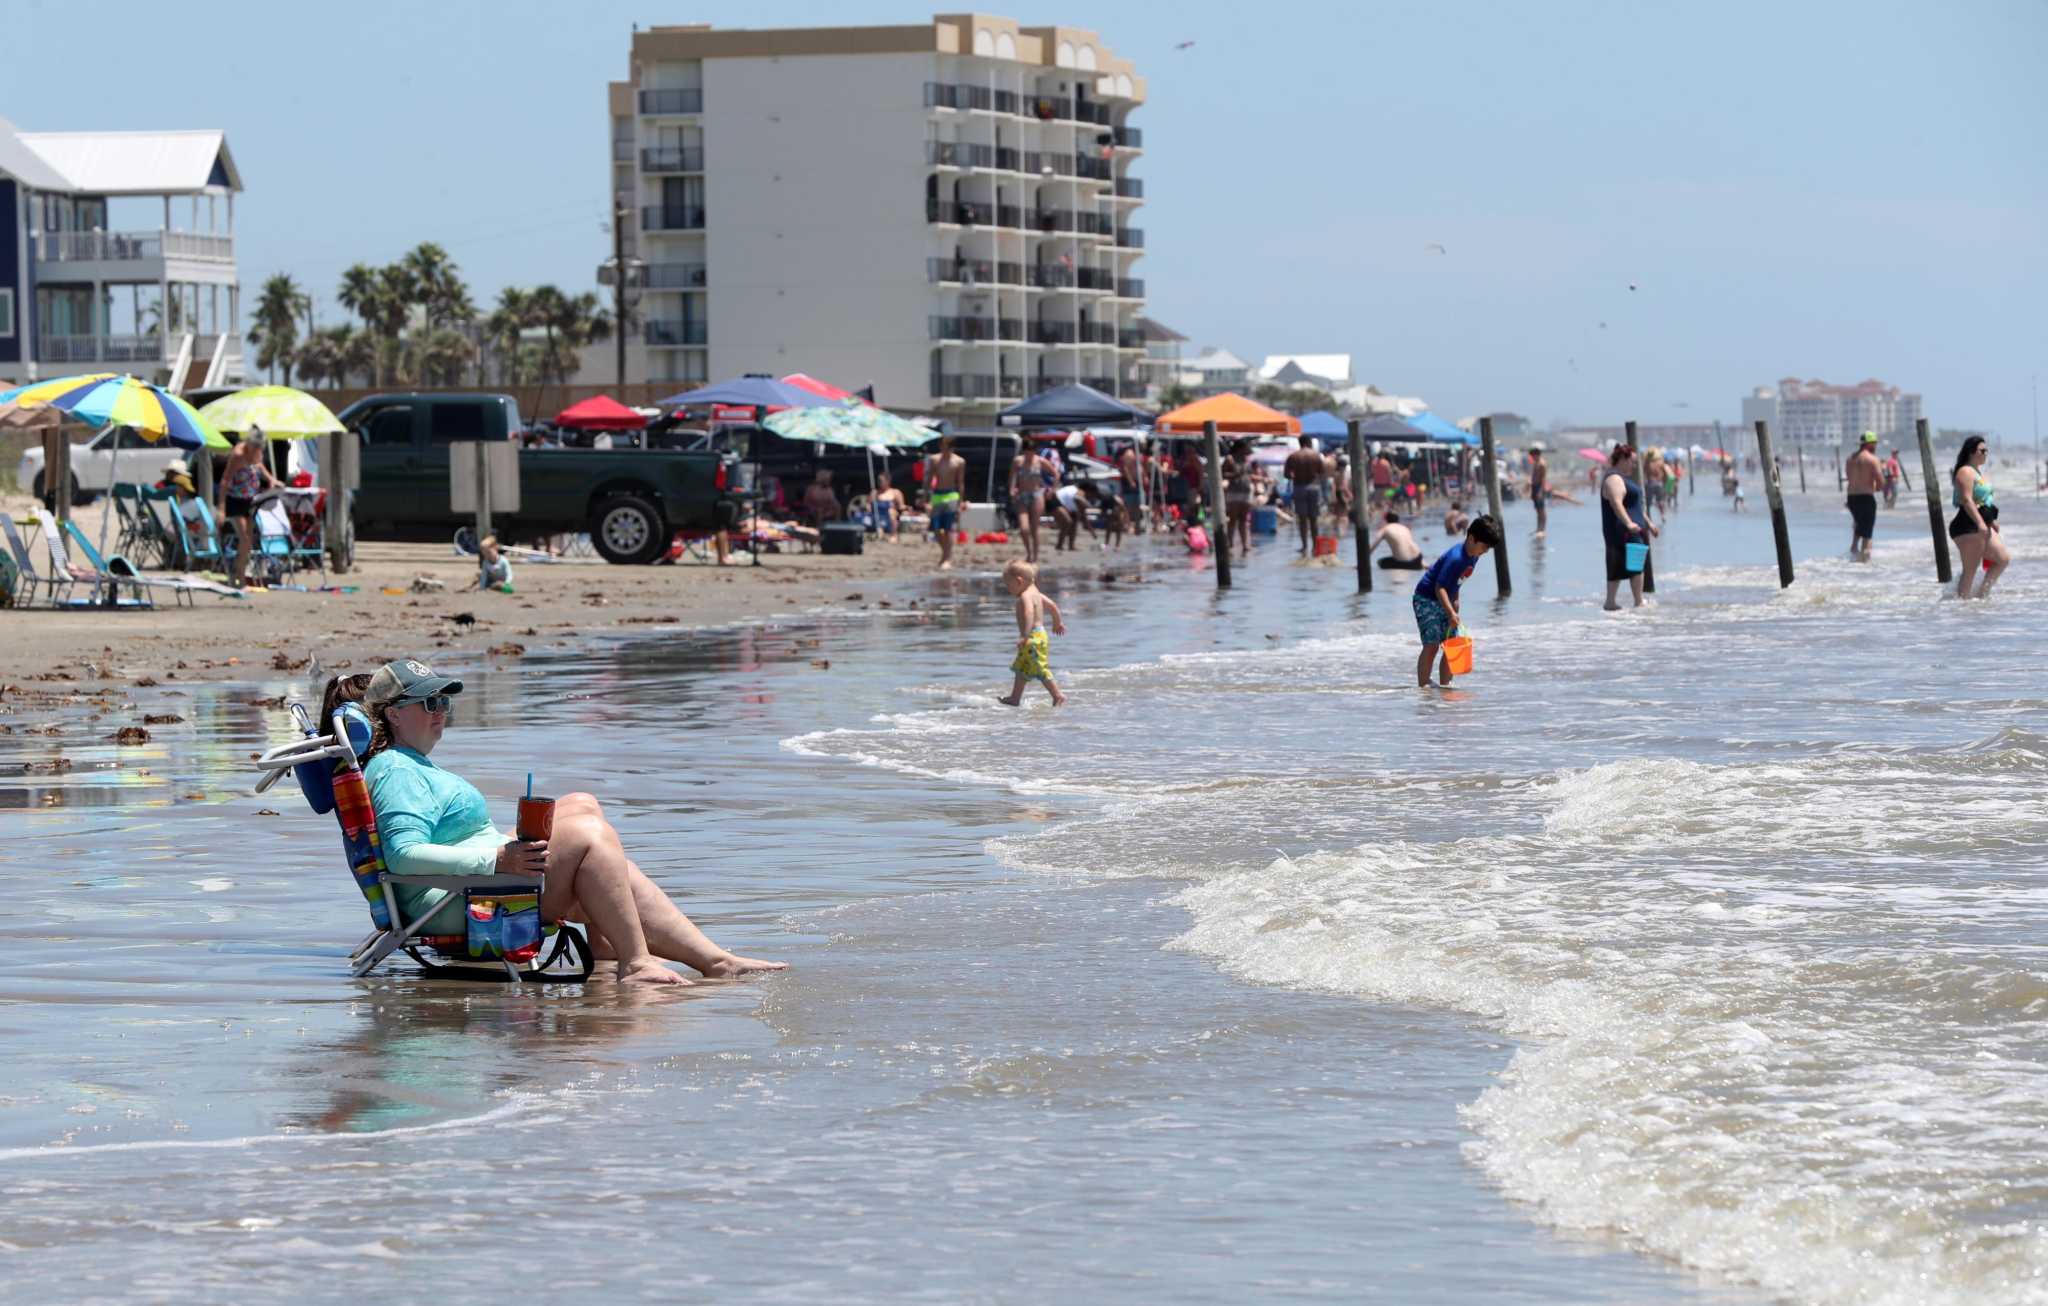 Galveston Beaches Reopen With Mass Crowds Some Safety Issues